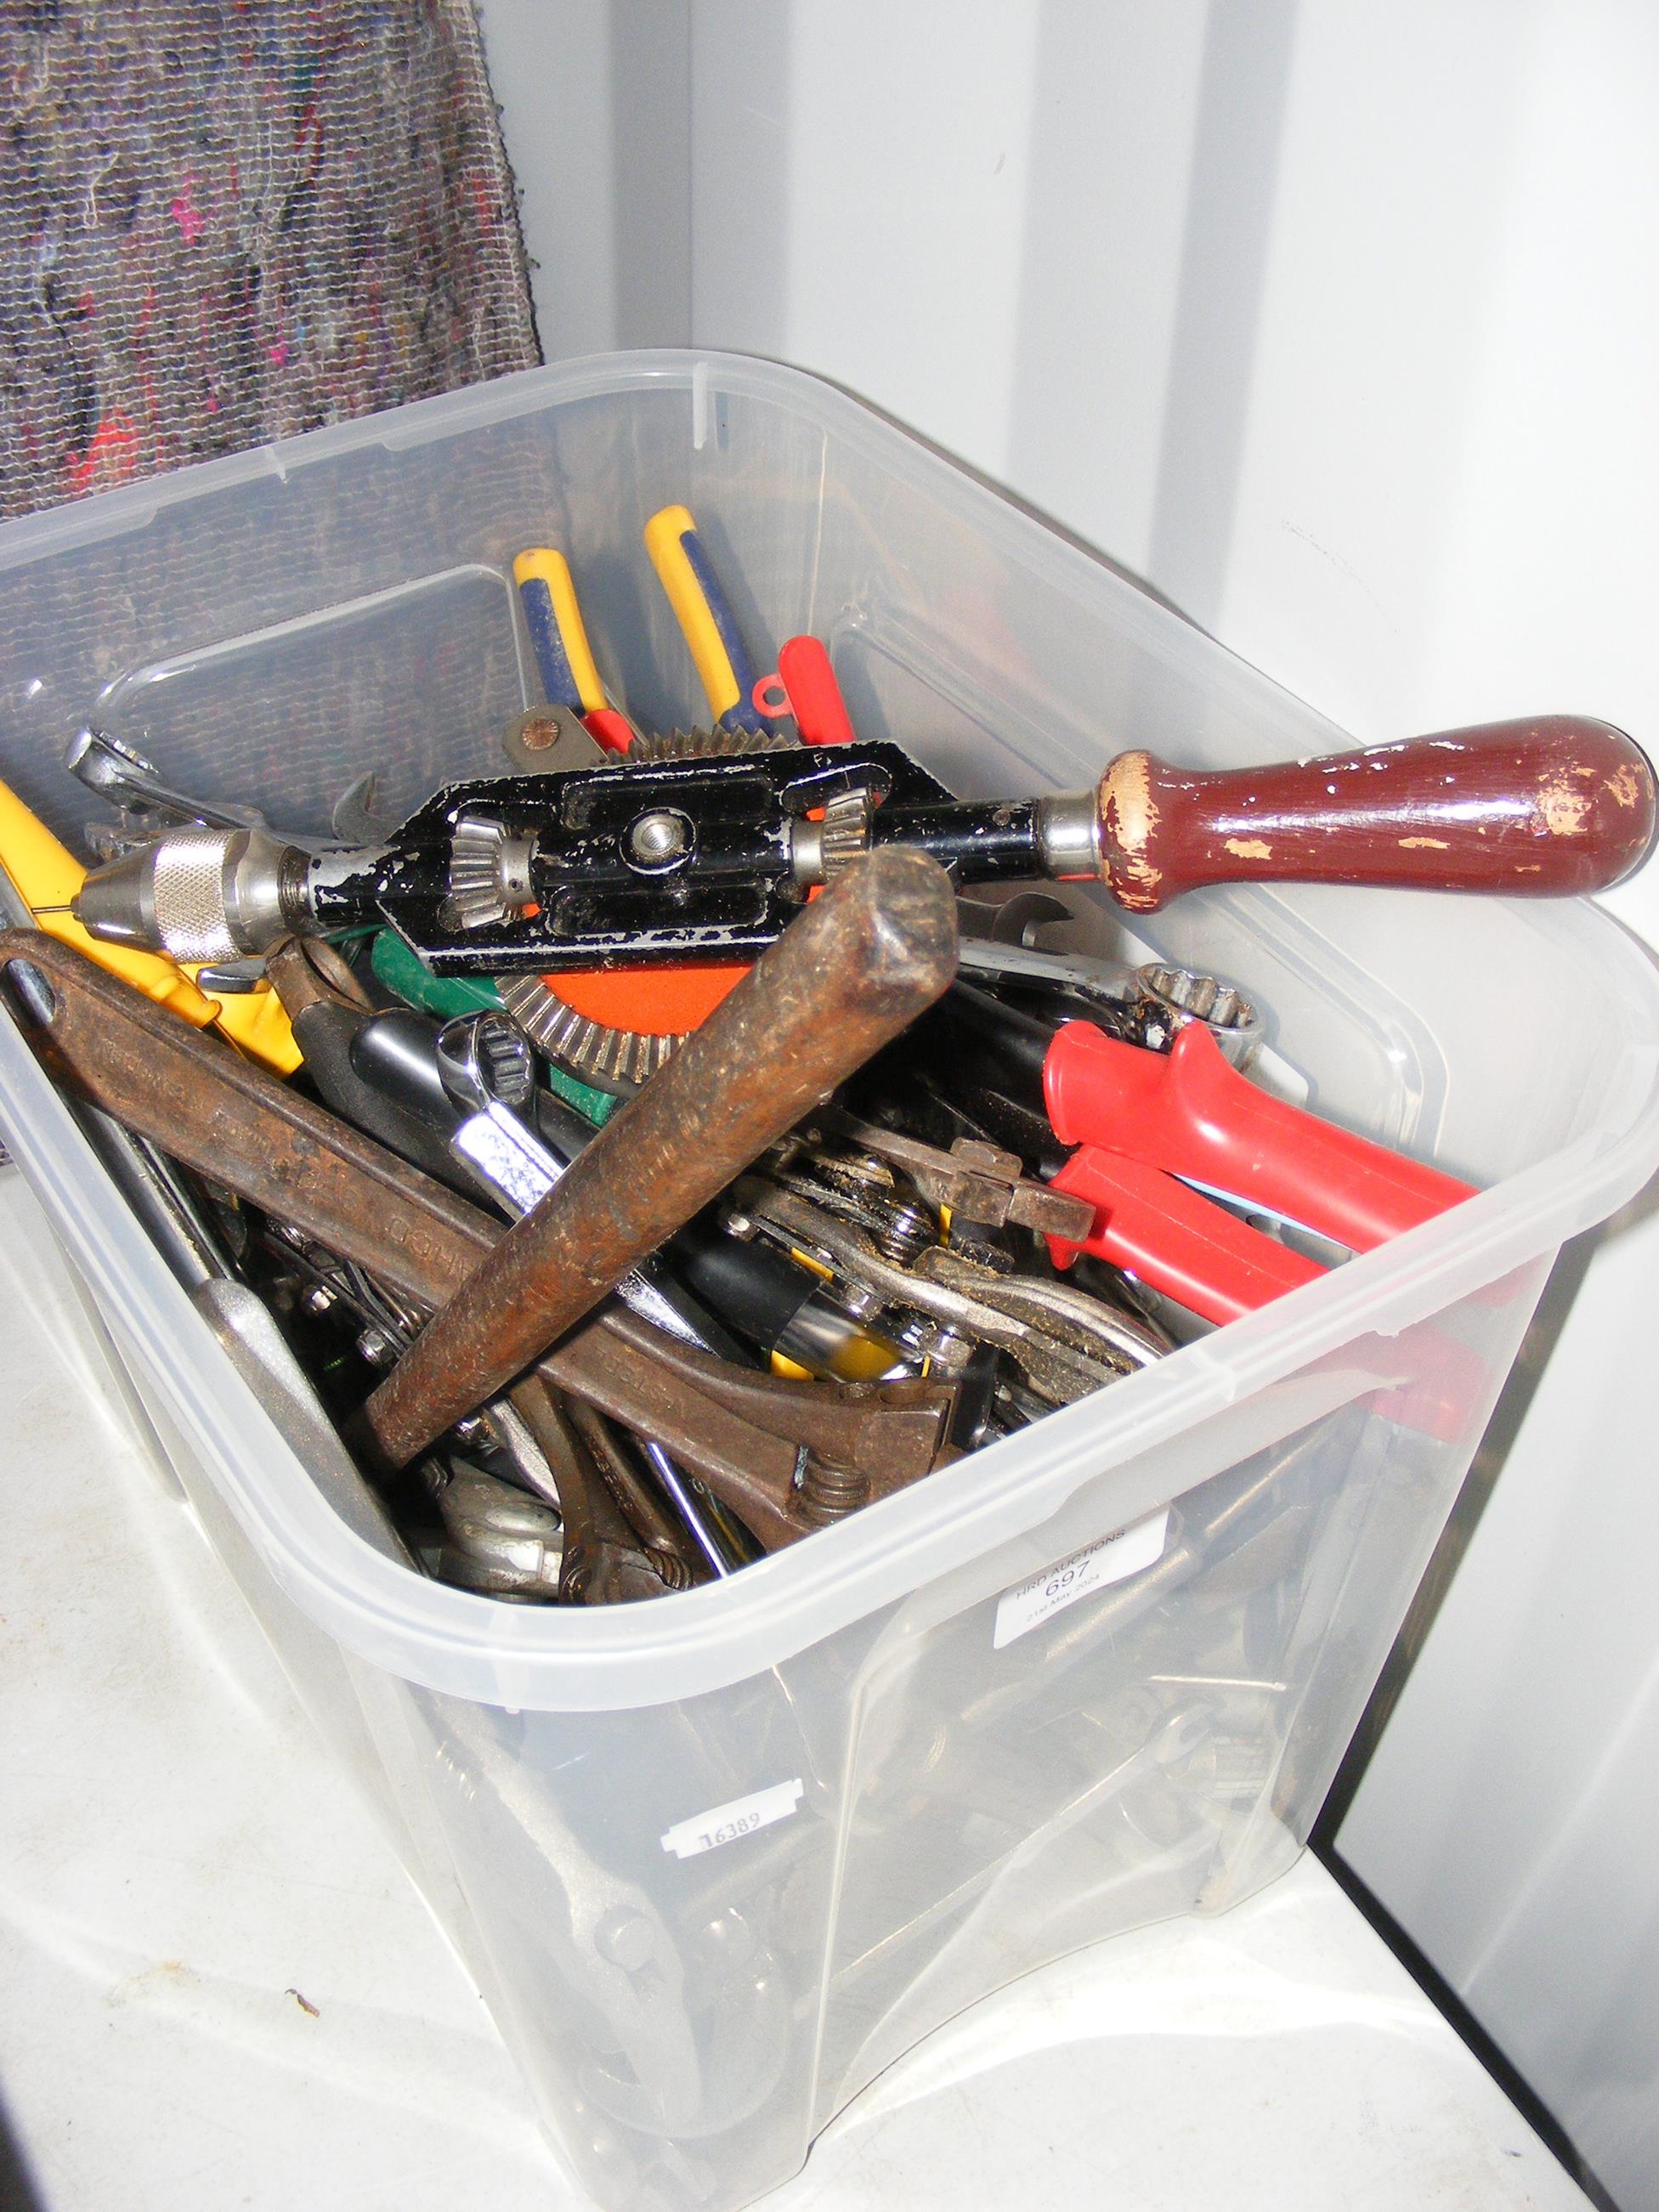 A plastic box containing various useful tools